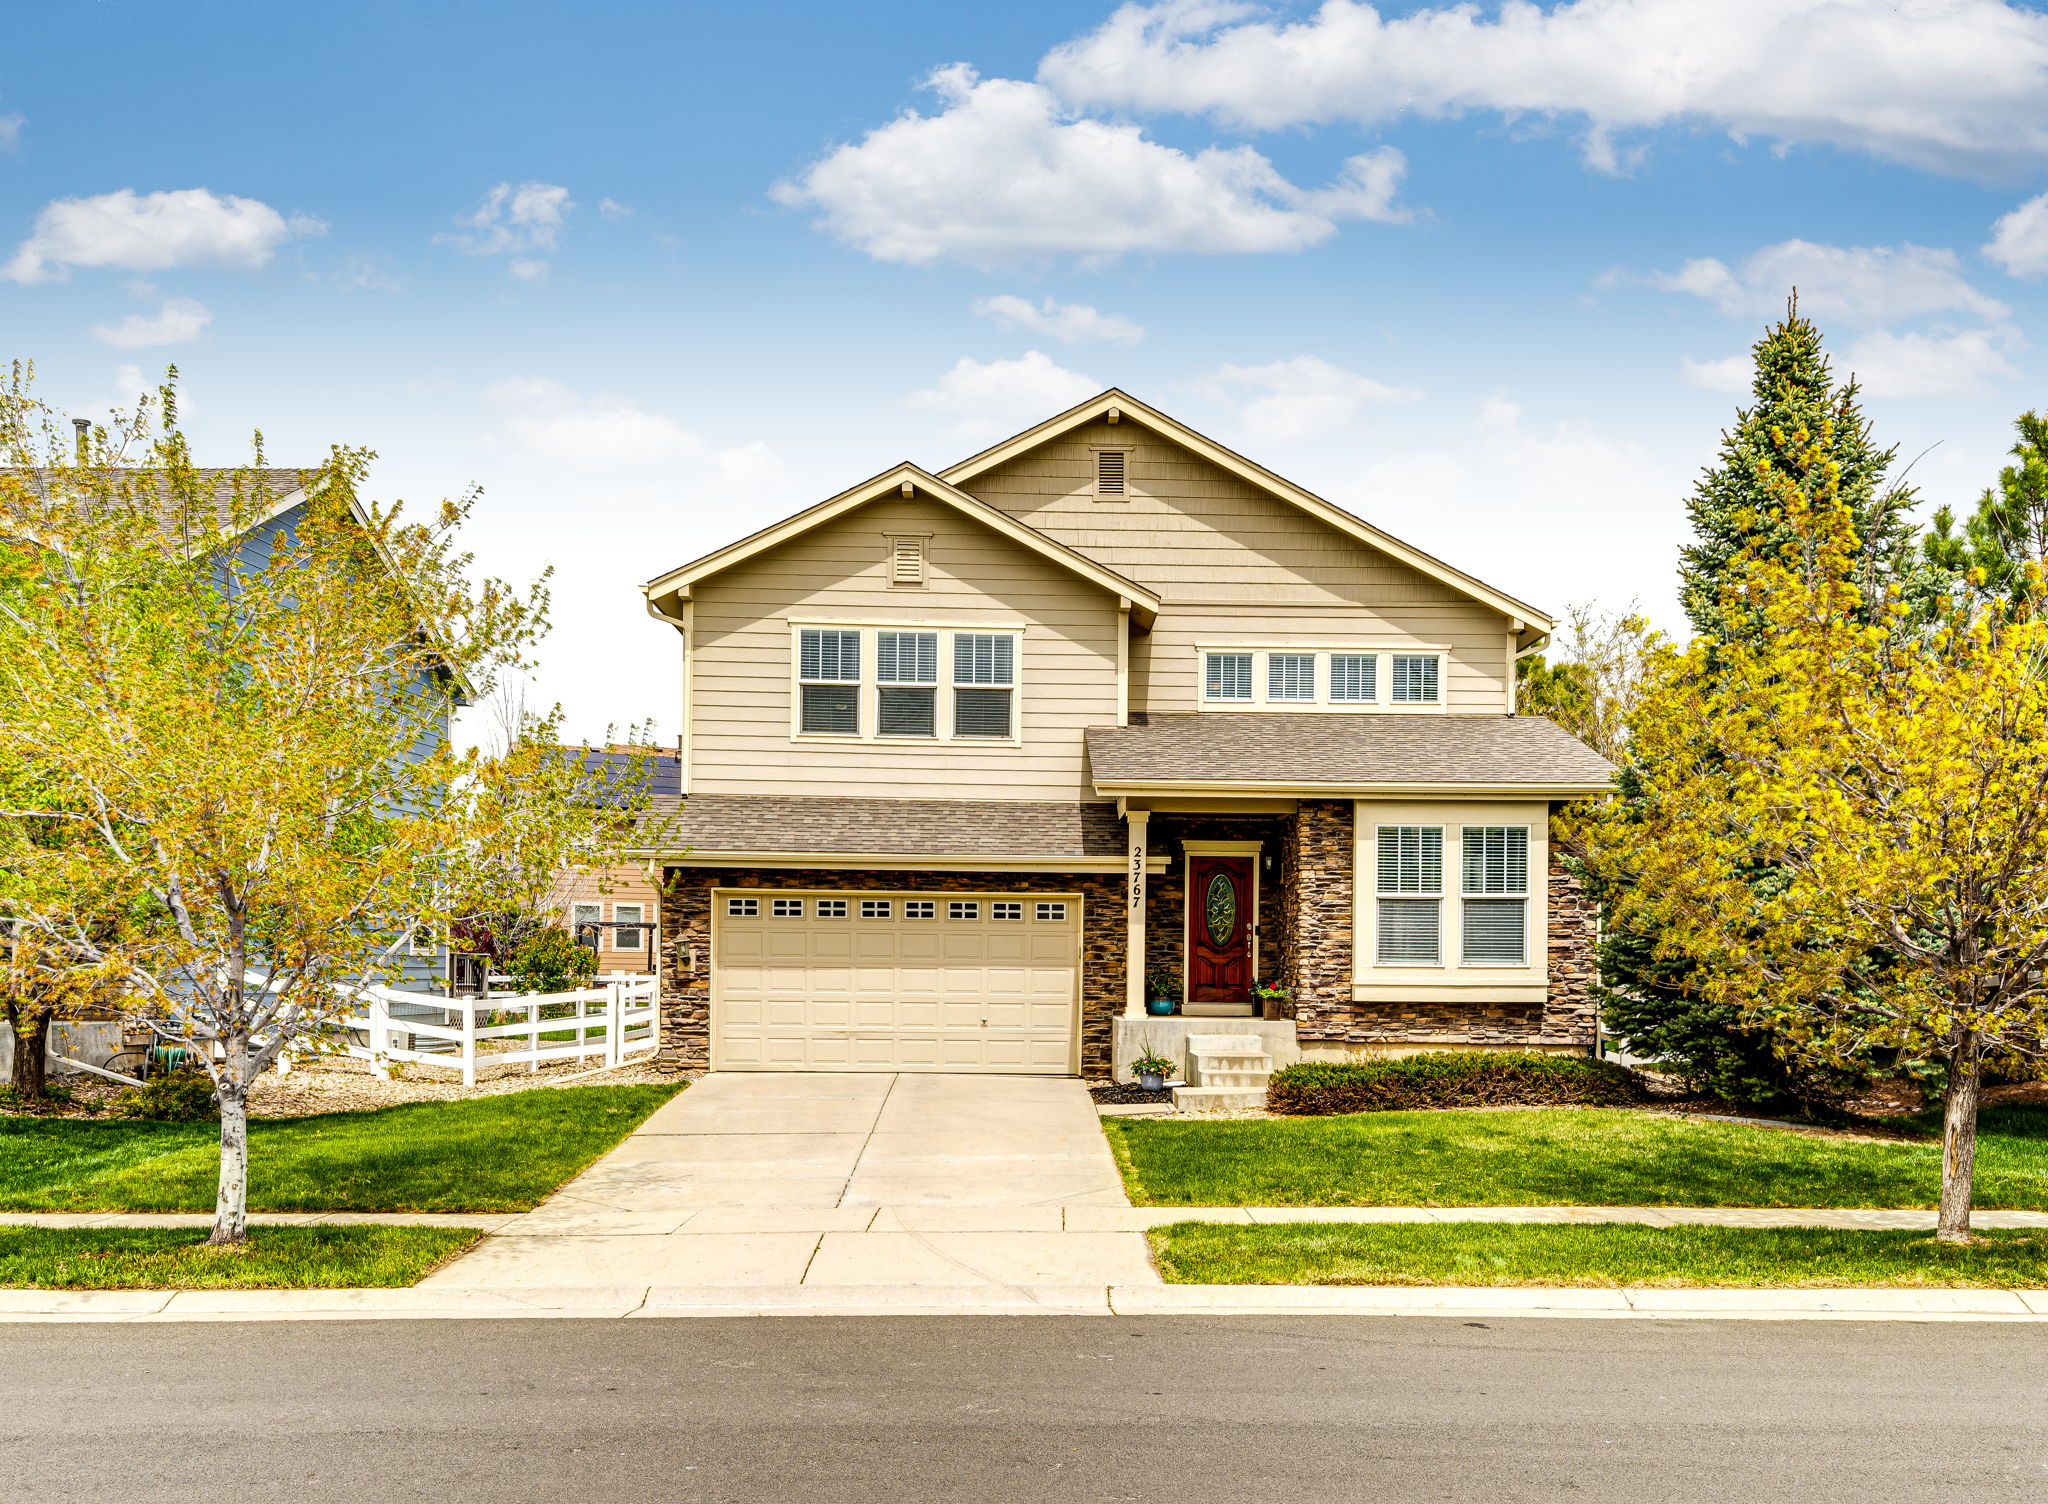 Must see this beautiful home located in the Murphy Creek Golf Course community in Aurora!